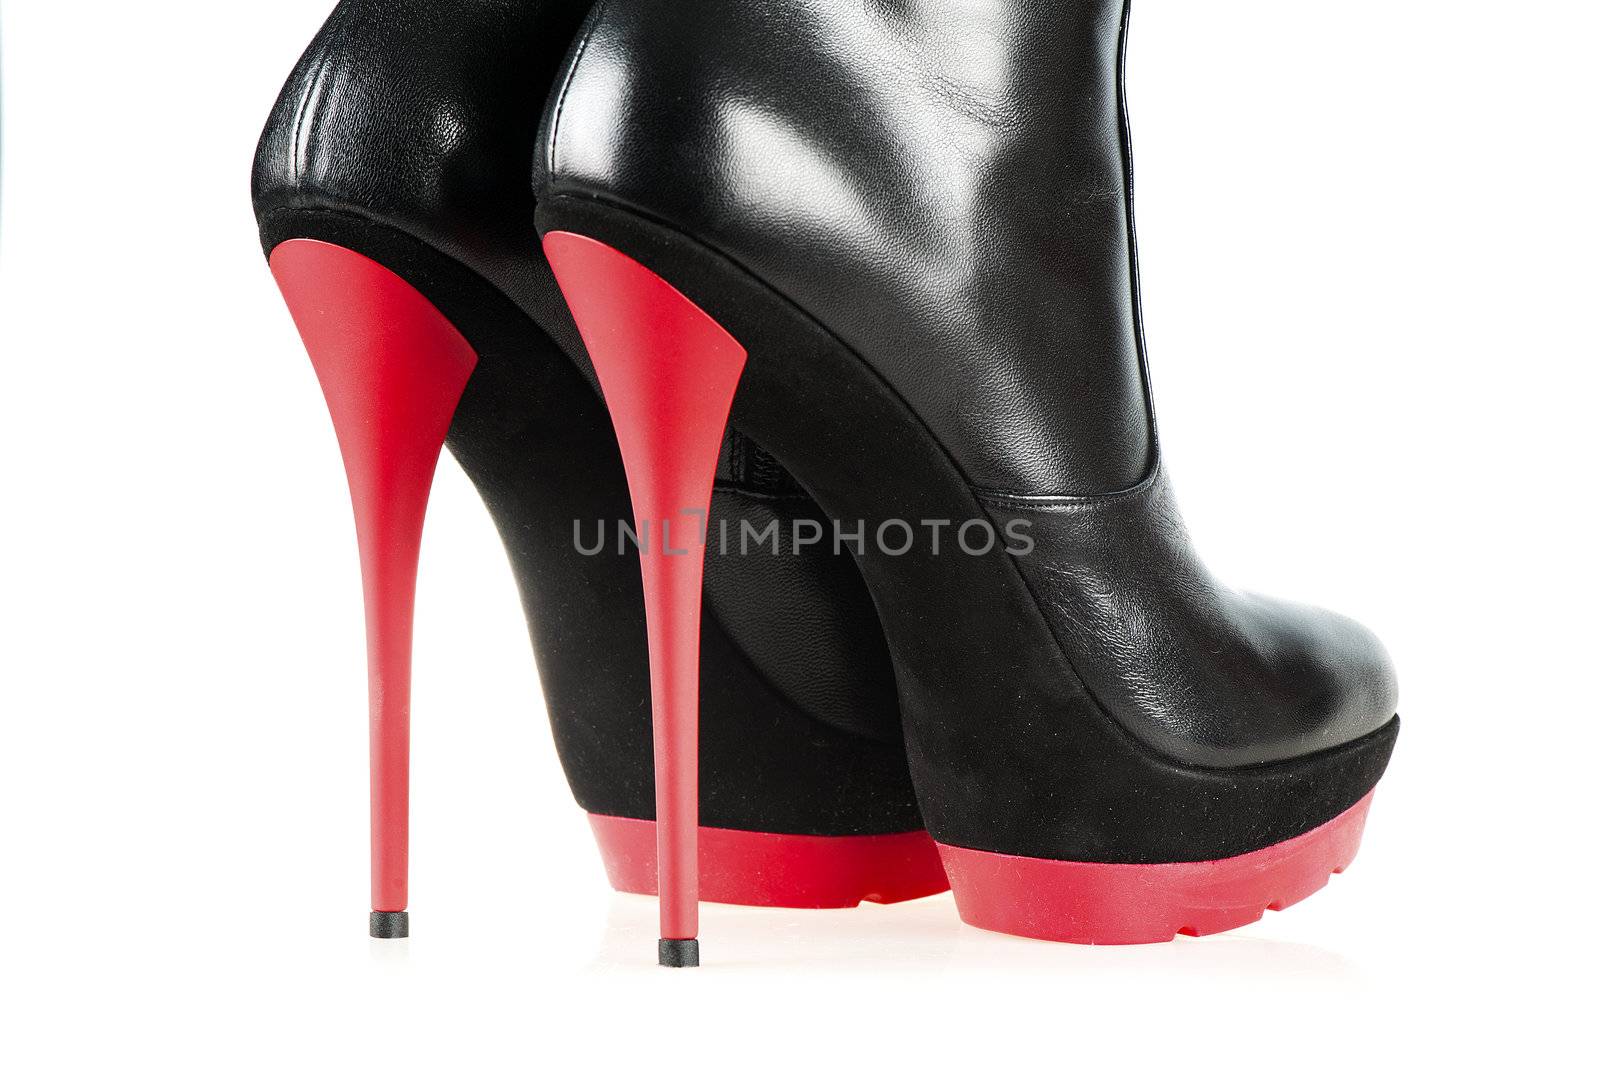 Close-up shot of a pair of fetish boots, high heels with platform, black and red color.